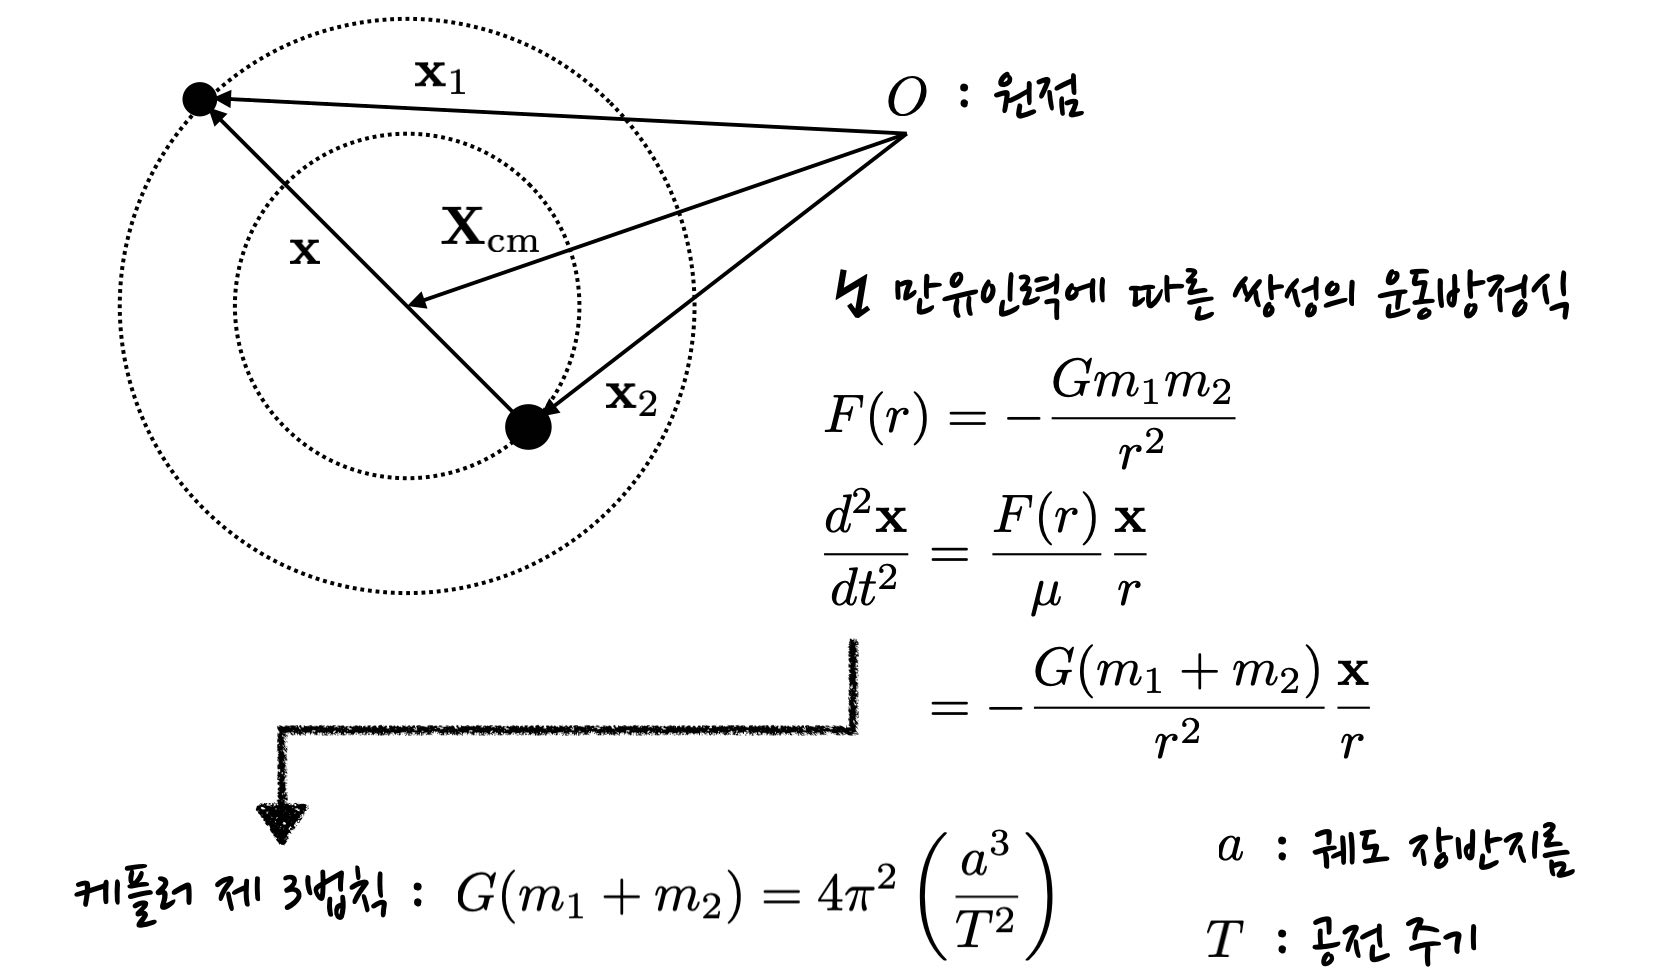 schematics of two body problem with Newtonian gravity. The equation of motion for relative position is written in terms of the reduced mass.